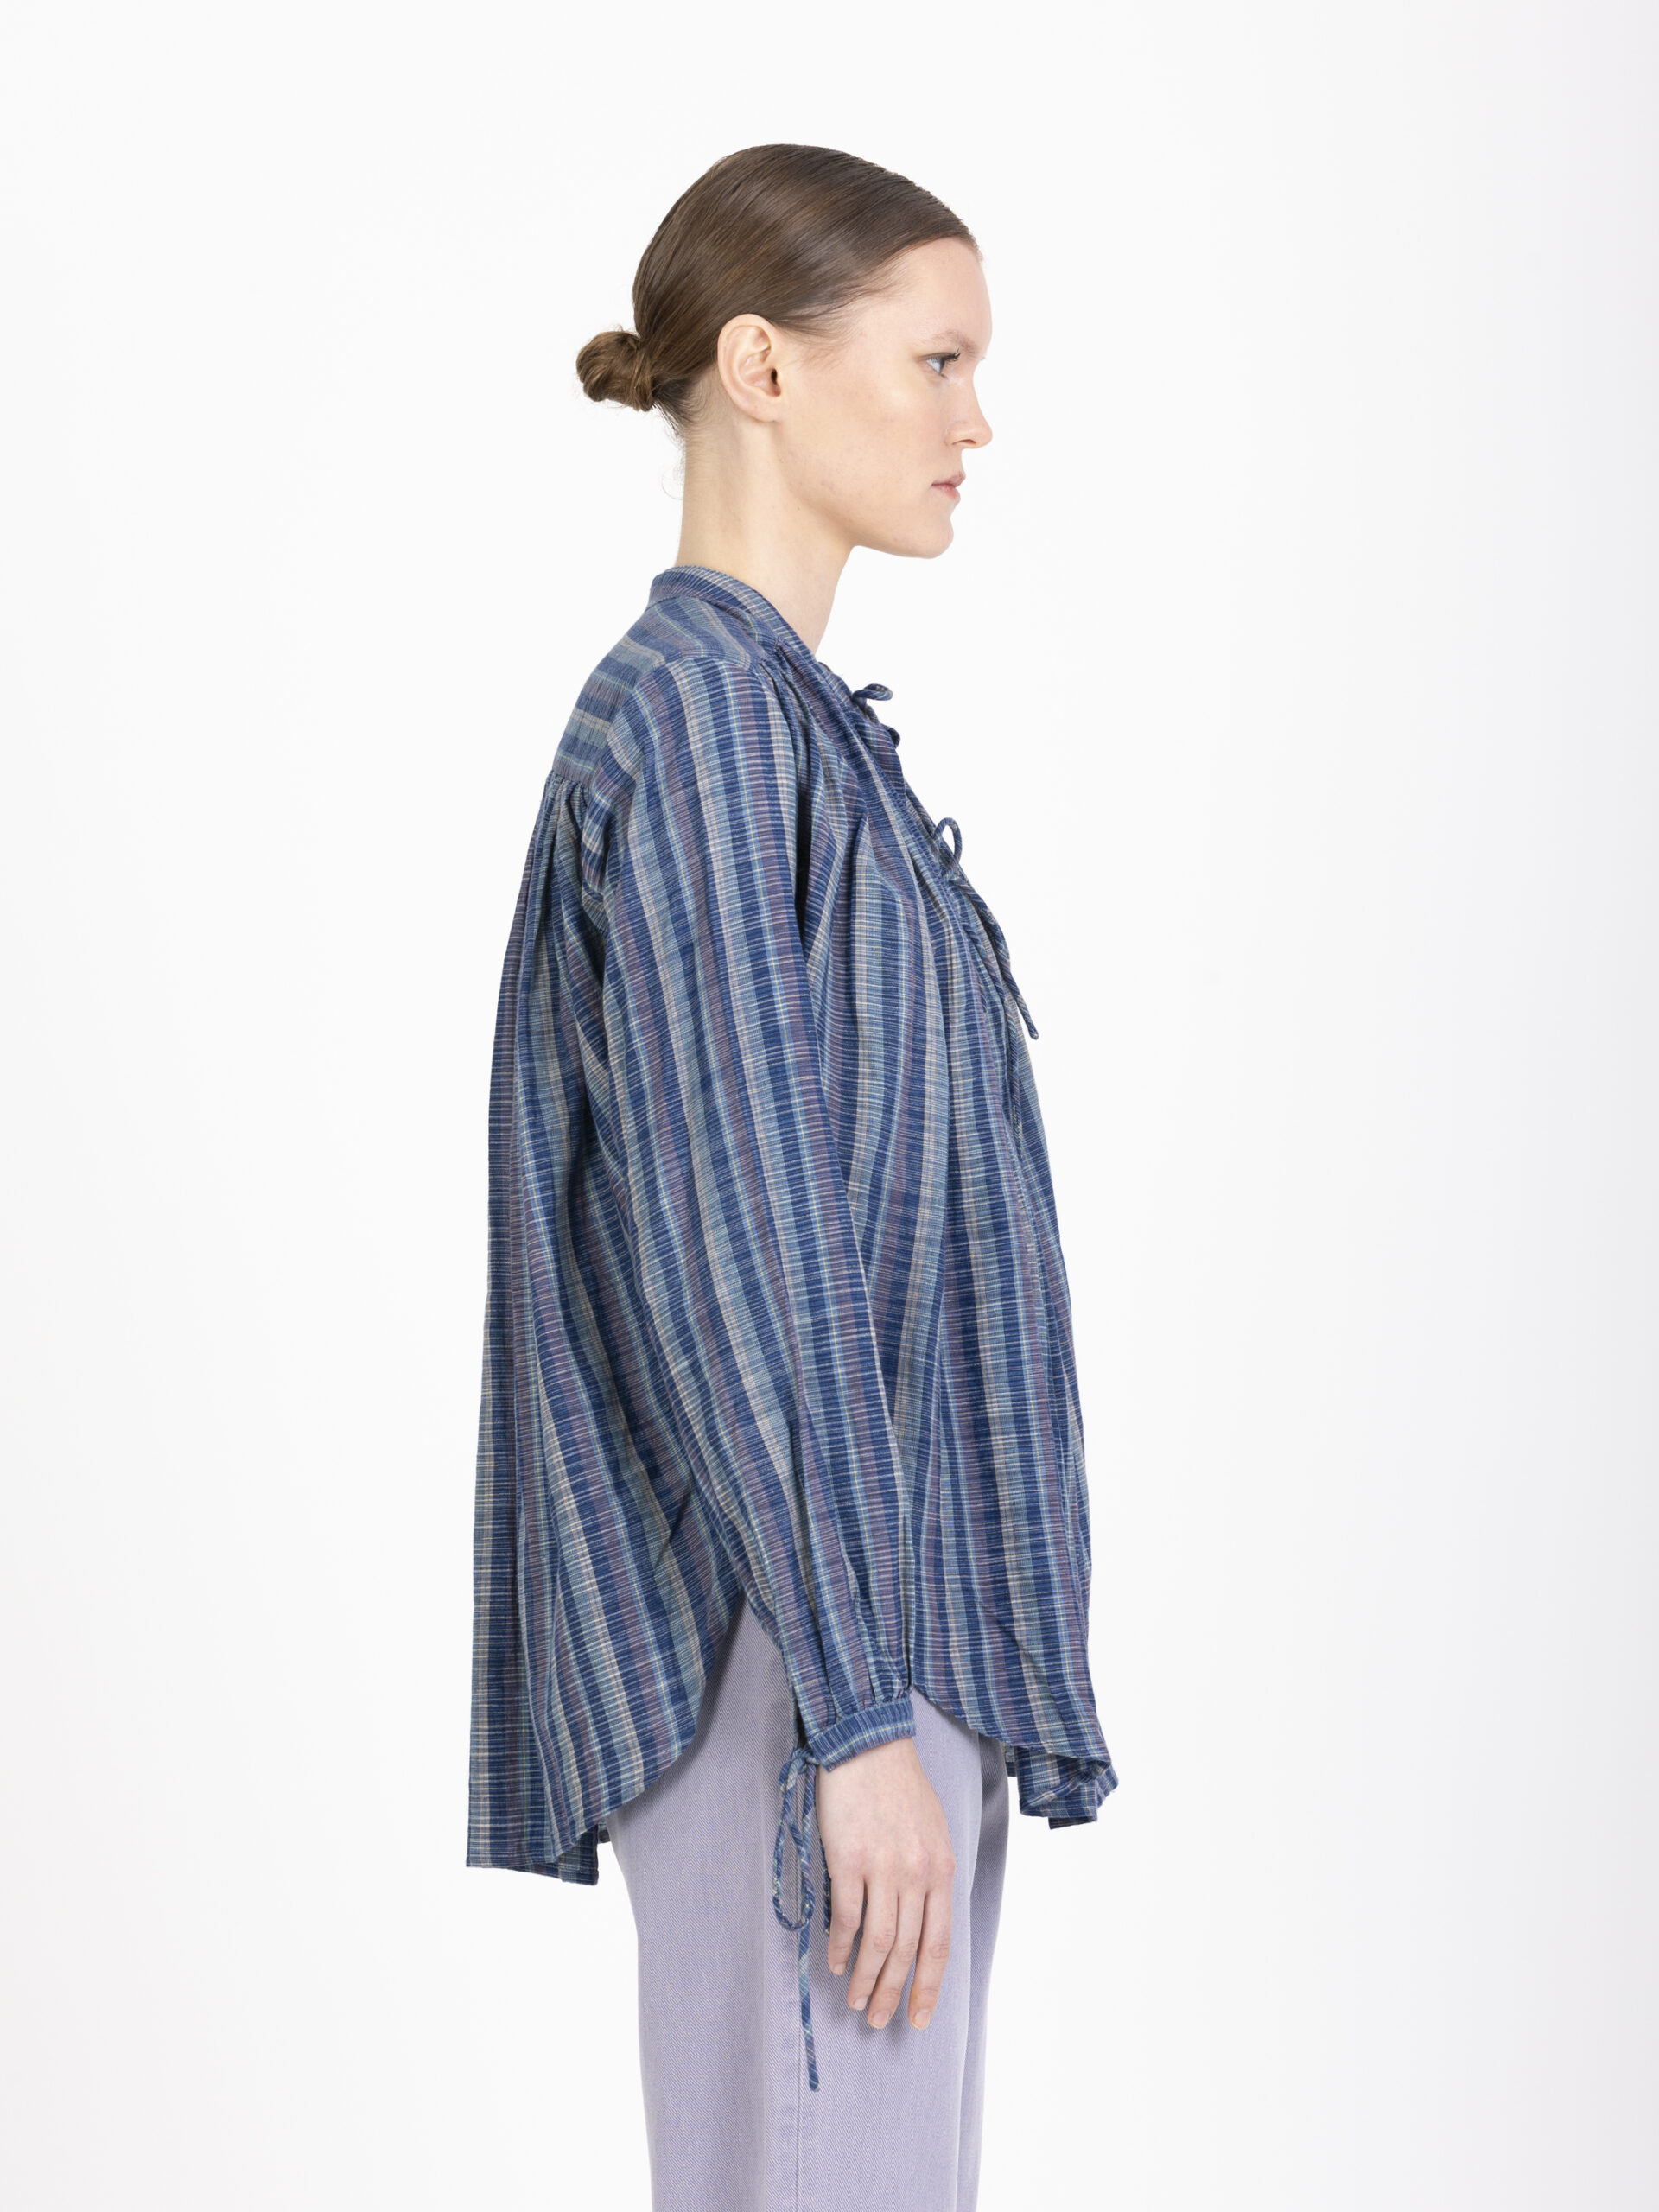 new-cigar-blue-green-checked-blouse-voluminous-ties-pleated-laurencebras-matchboxathens